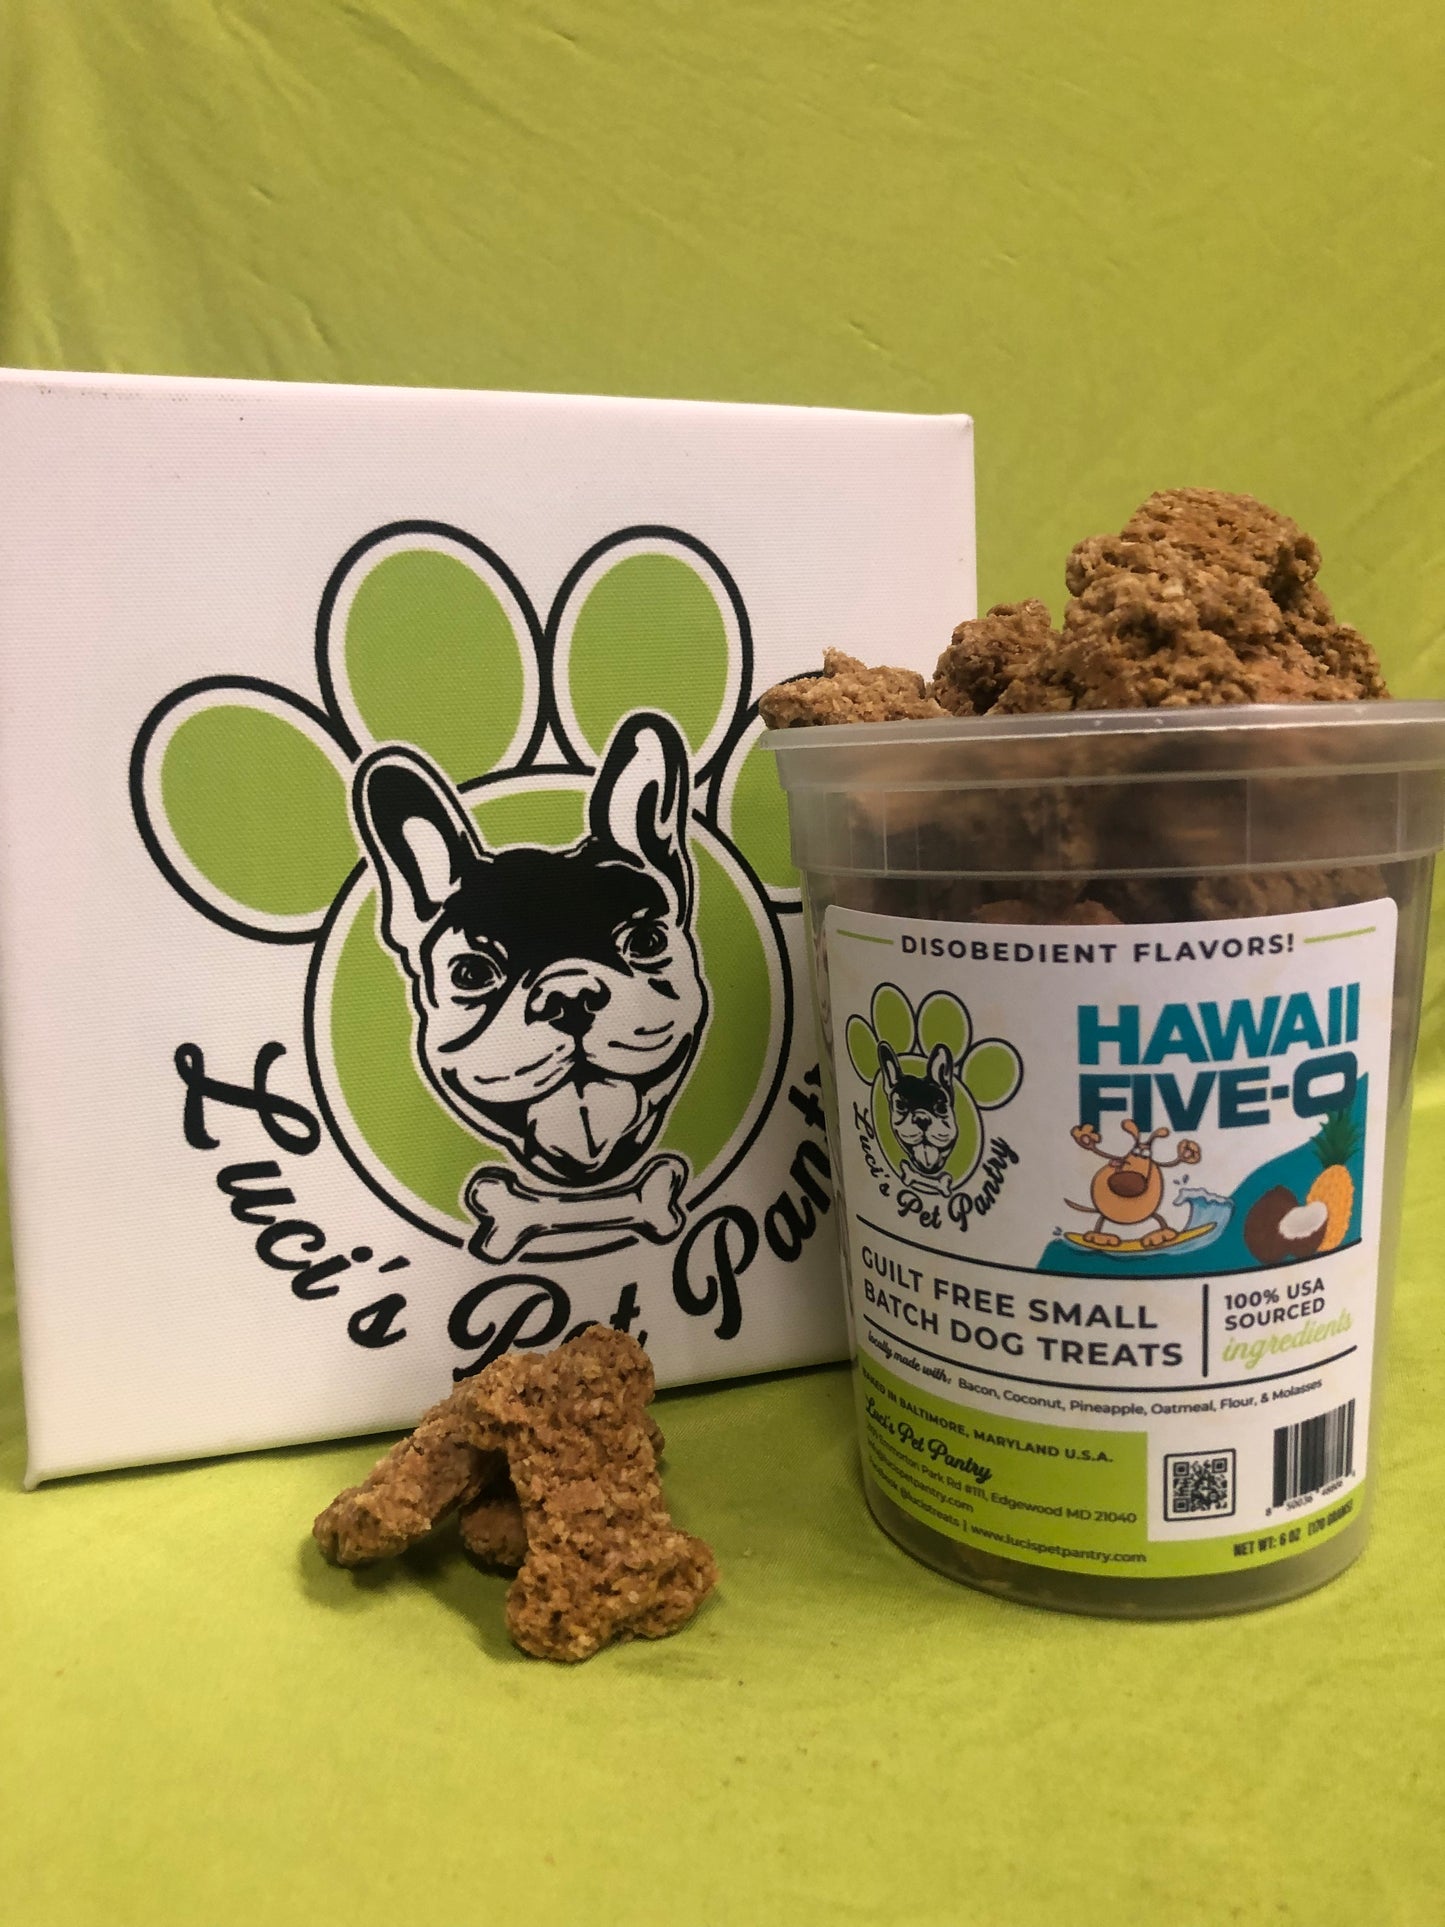 Hawaii Five-O - All Natural "Bacon, Pineapple, & Coconut" Dog & Puppy Treats - Disobedient Tub of Biscuits